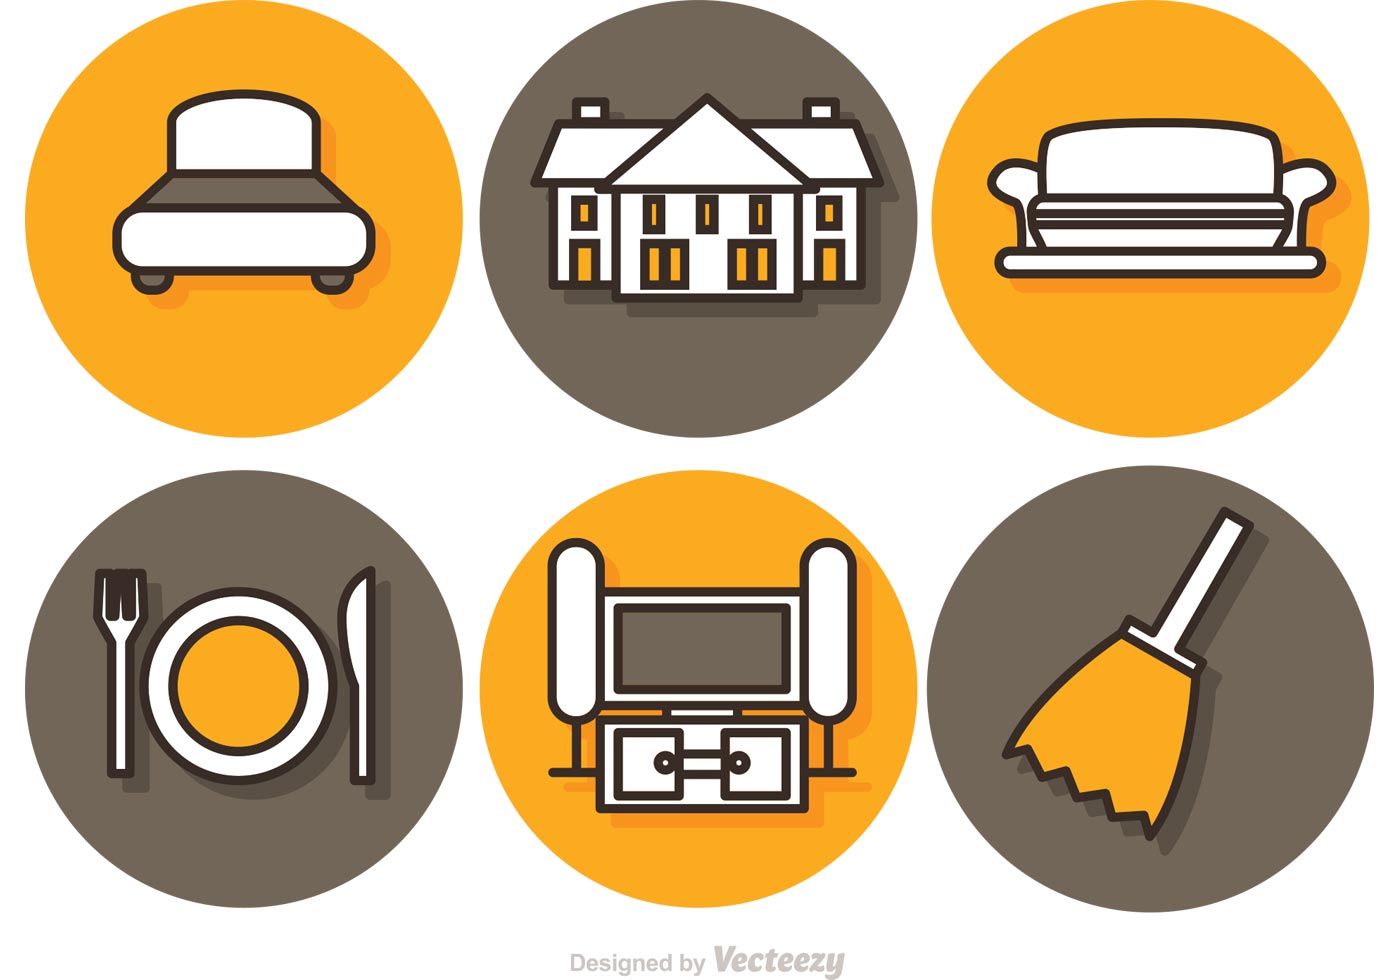 Download Home Icon Free Vector Art - (29030 Free Downloads)